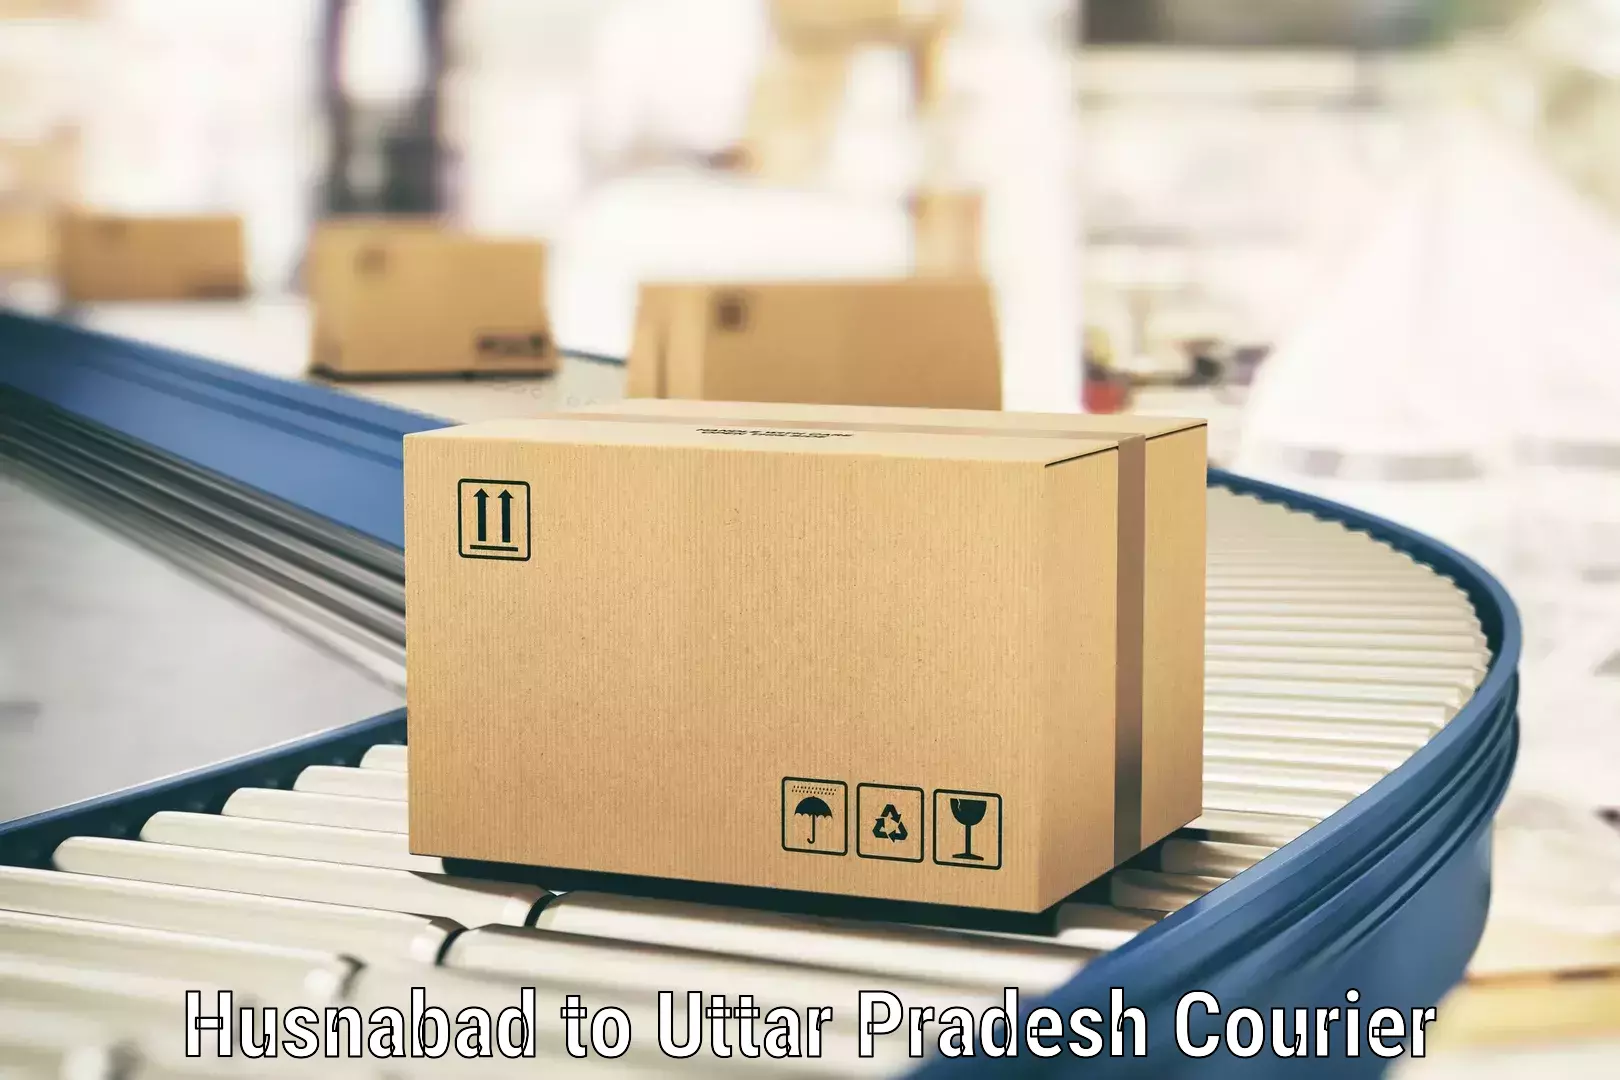 Efficient parcel tracking Husnabad to Meerut